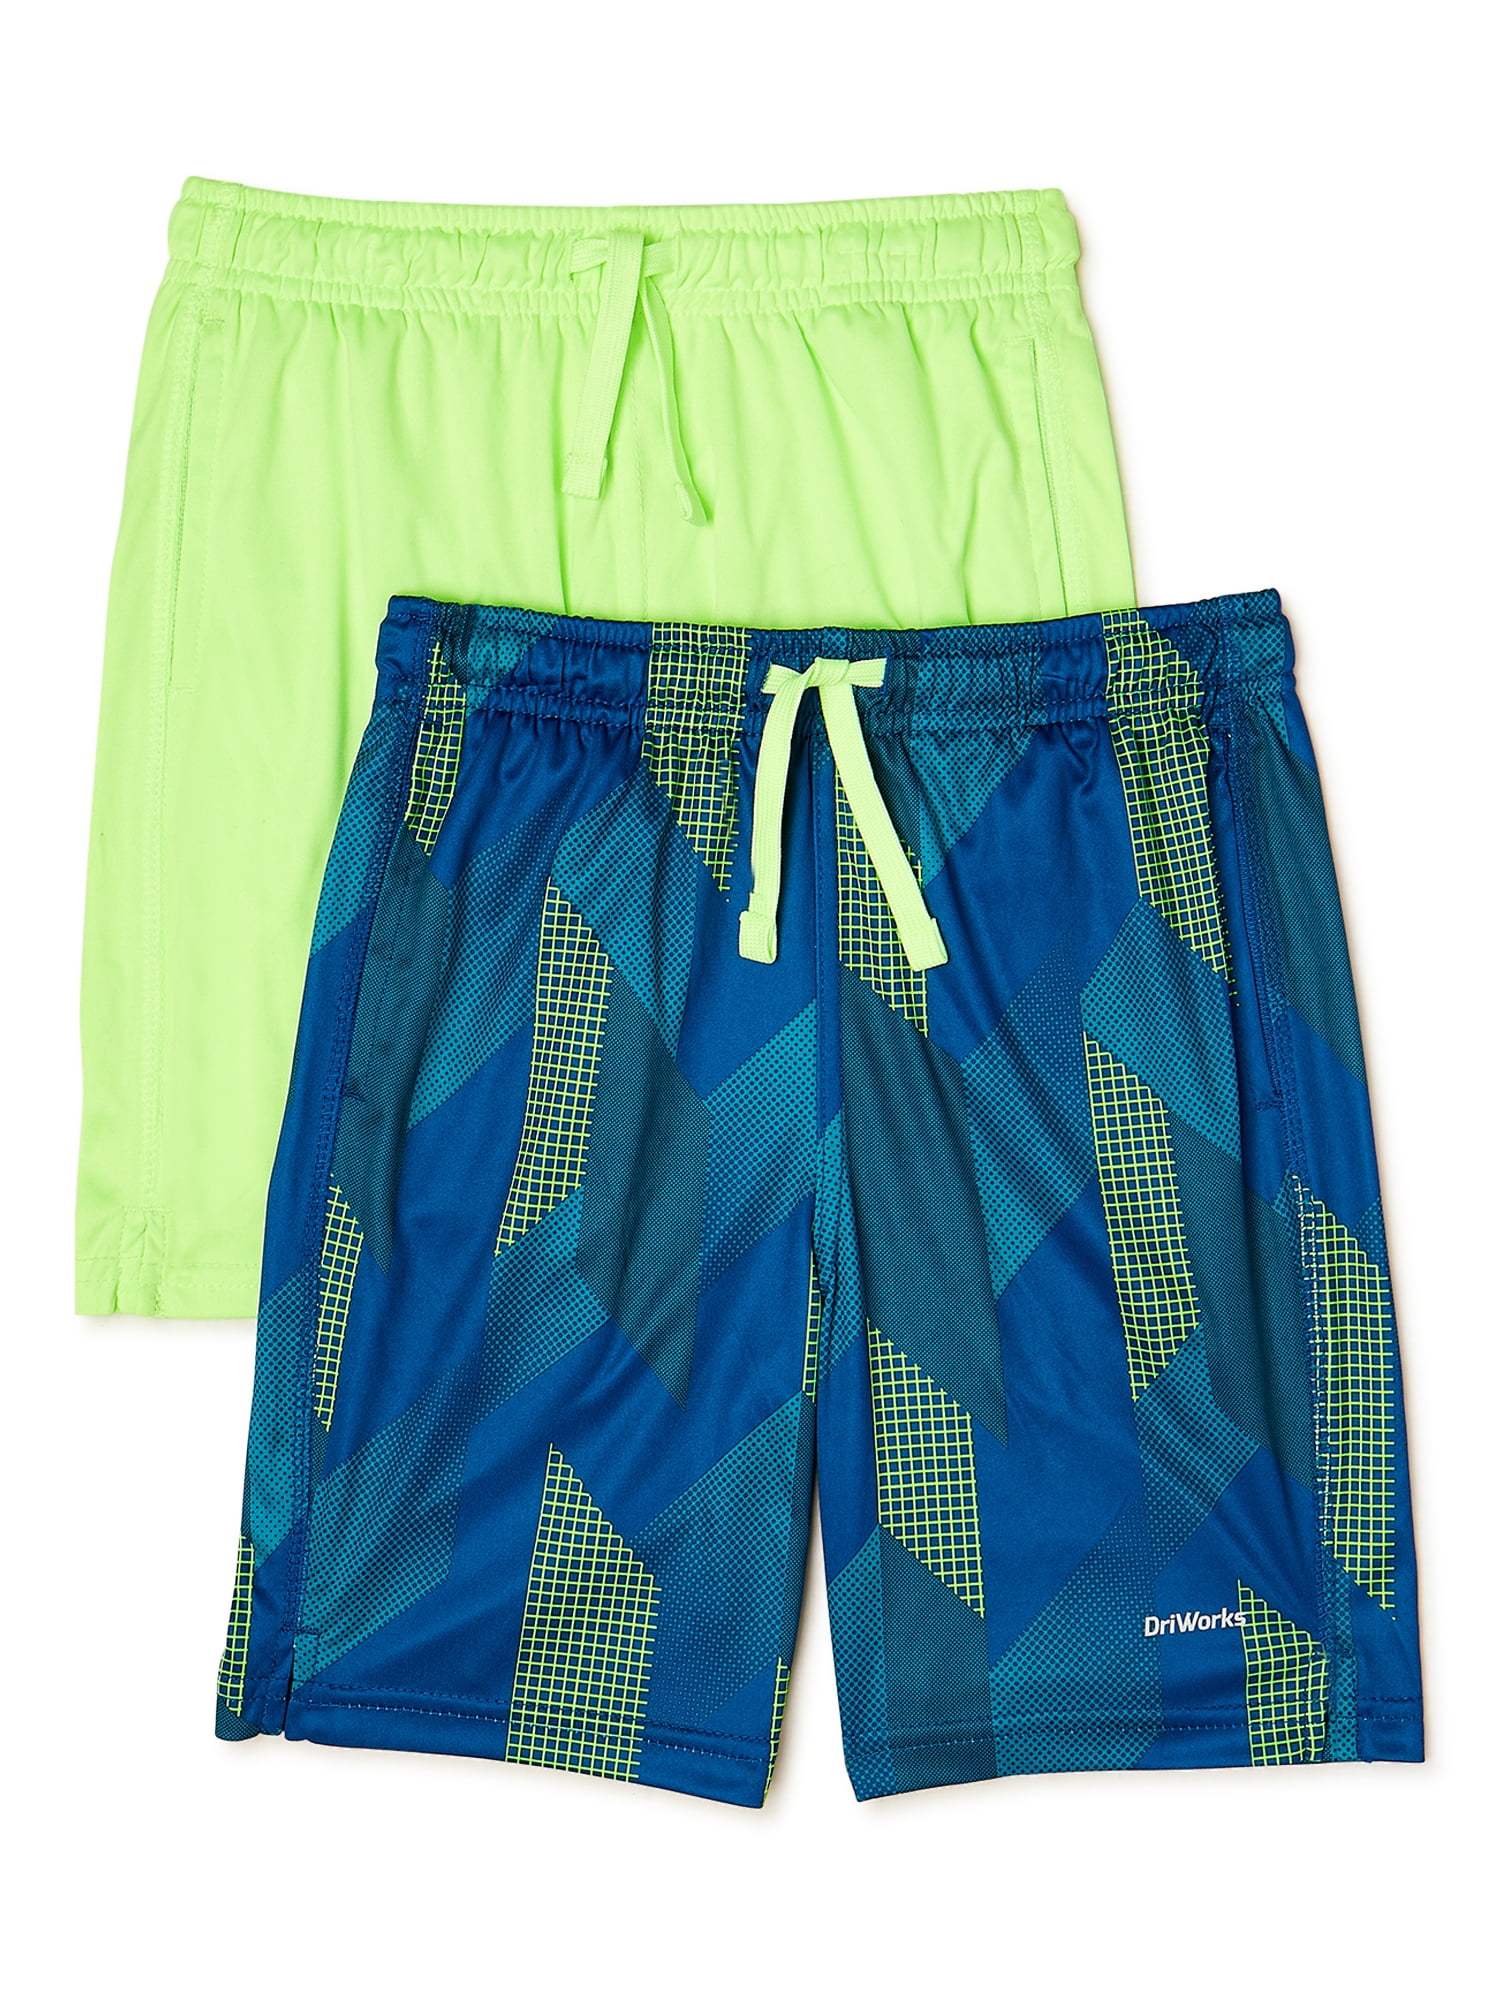 NWT boys Under Armour 2 pc tank/shorts set size 6 Red/Blue 